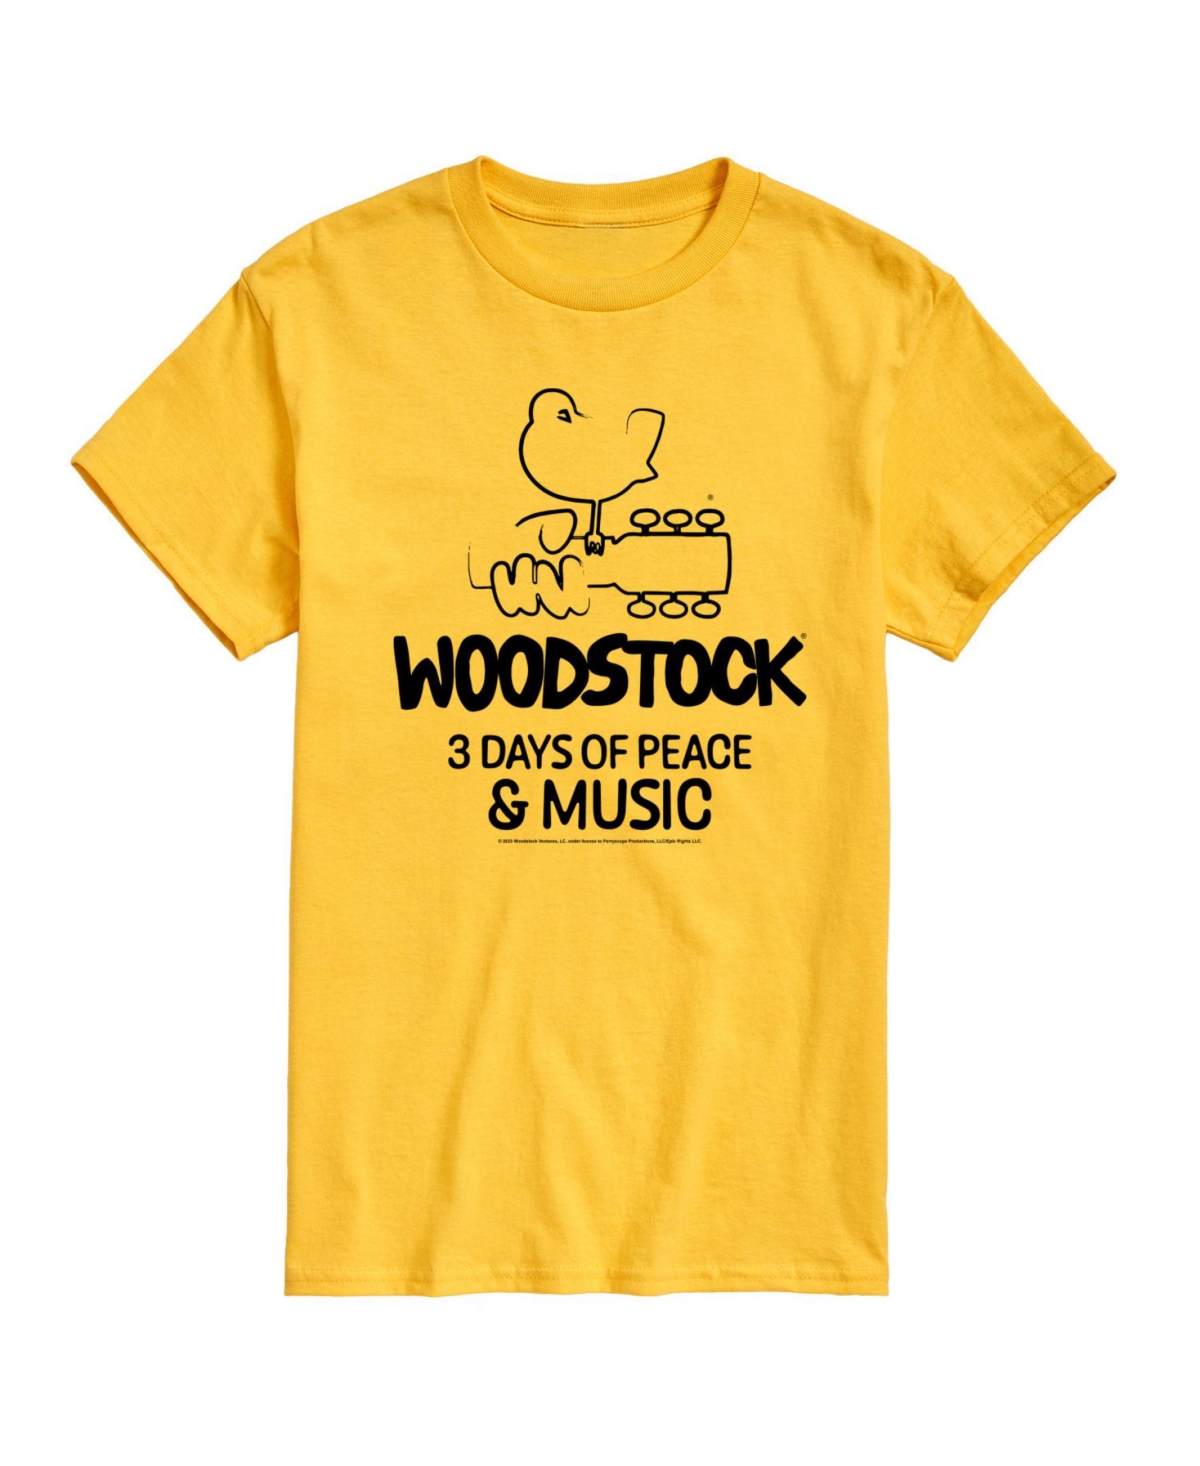 Hybrid Apparel Woodstock 3 Days Of Peace And Music Mens Short Sleeve Tee - Yellow